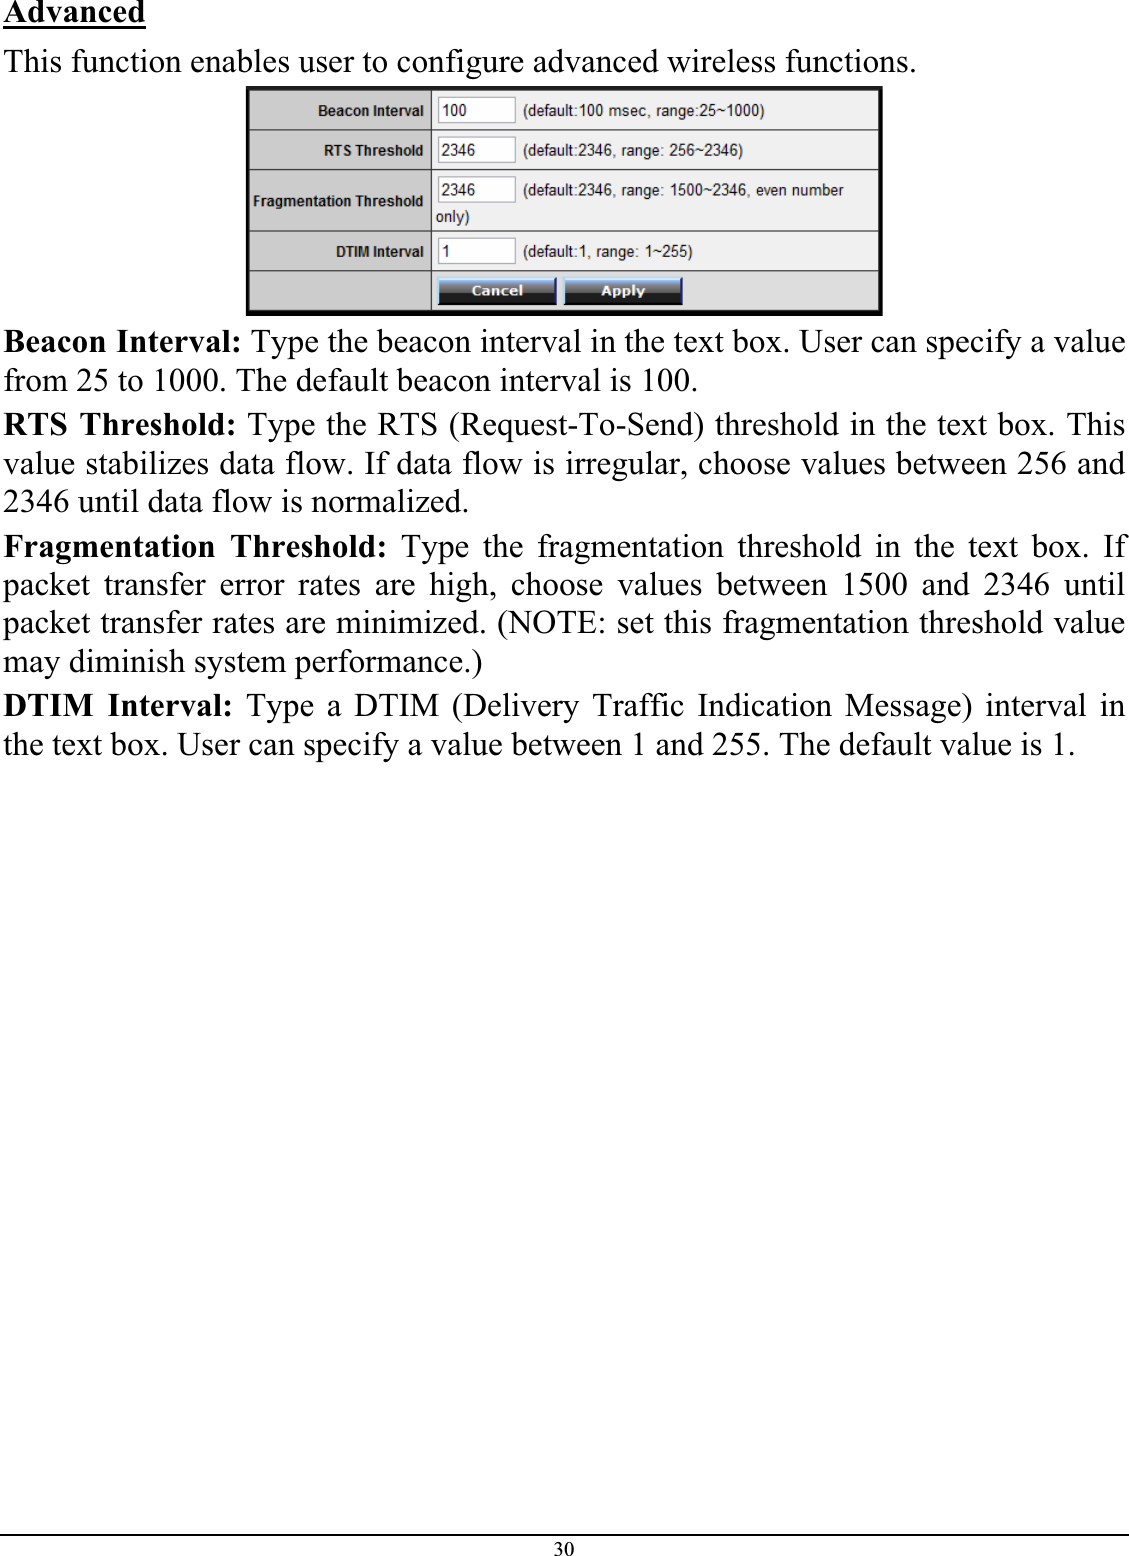 30AdvancedThis function enables user to configure advanced wireless functions. Beacon Interval: Type the beacon interval in the text box. User can specify a value from 25 to 1000. The default beacon interval is 100. RTS Threshold: Type the RTS (Request-To-Send) threshold in the text box. This value stabilizes data flow. If data flow is irregular, choose values between 256 and 2346 until data flow is normalized. Fragmentation Threshold: Type the fragmentation threshold in the text box. If packet transfer error rates are high, choose values between 1500 and 2346 until packet transfer rates are minimized. (NOTE: set this fragmentation threshold value may diminish system performance.) DTIM Interval: Type a DTIM (Delivery Traffic Indication Message) interval in the text box. User can specify a value between 1 and 255. The default value is 1. 